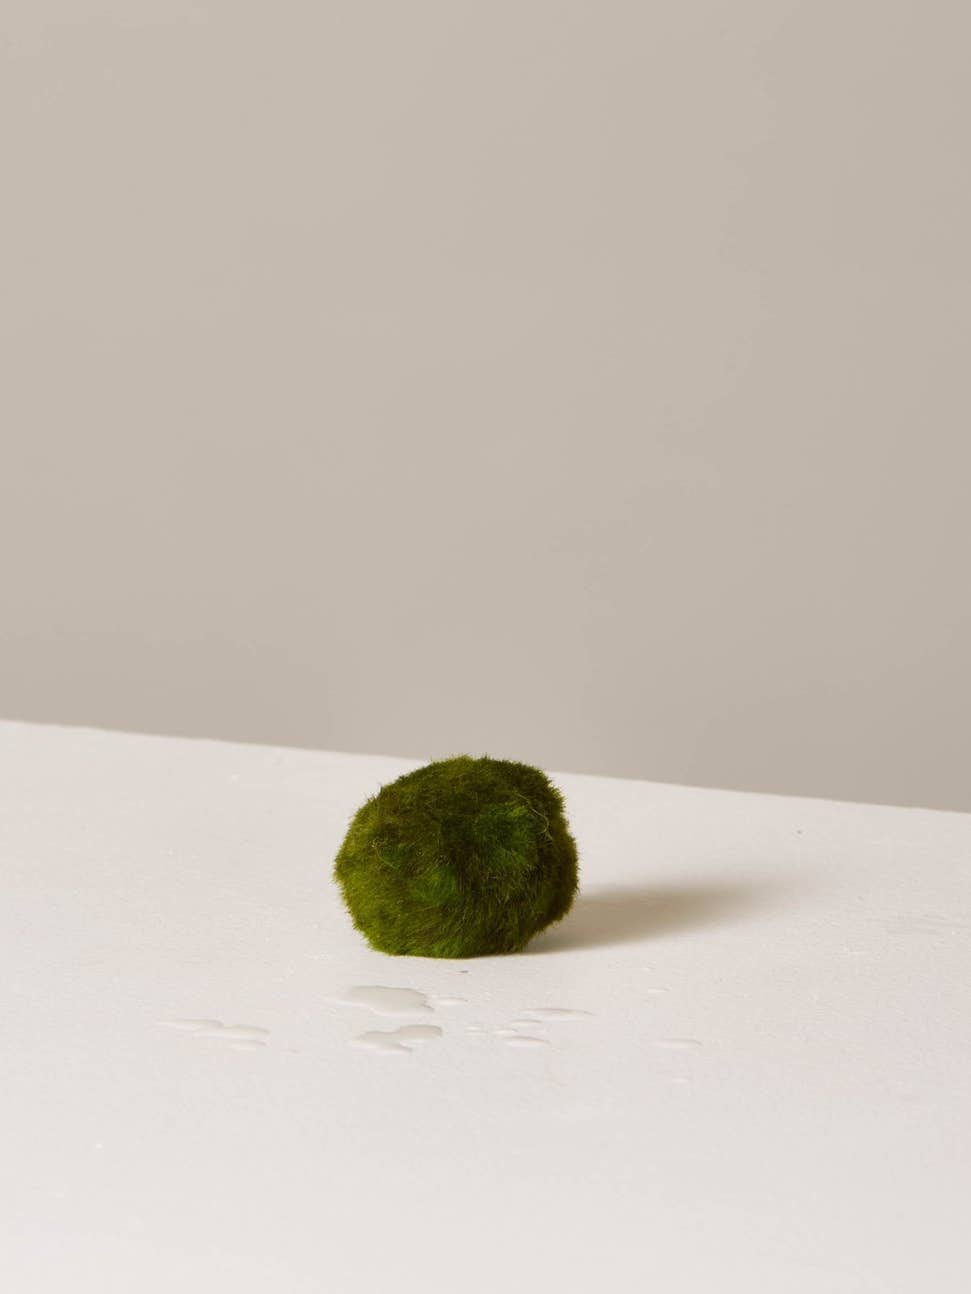 Everything You Need to Know About Marimo Moss Balls